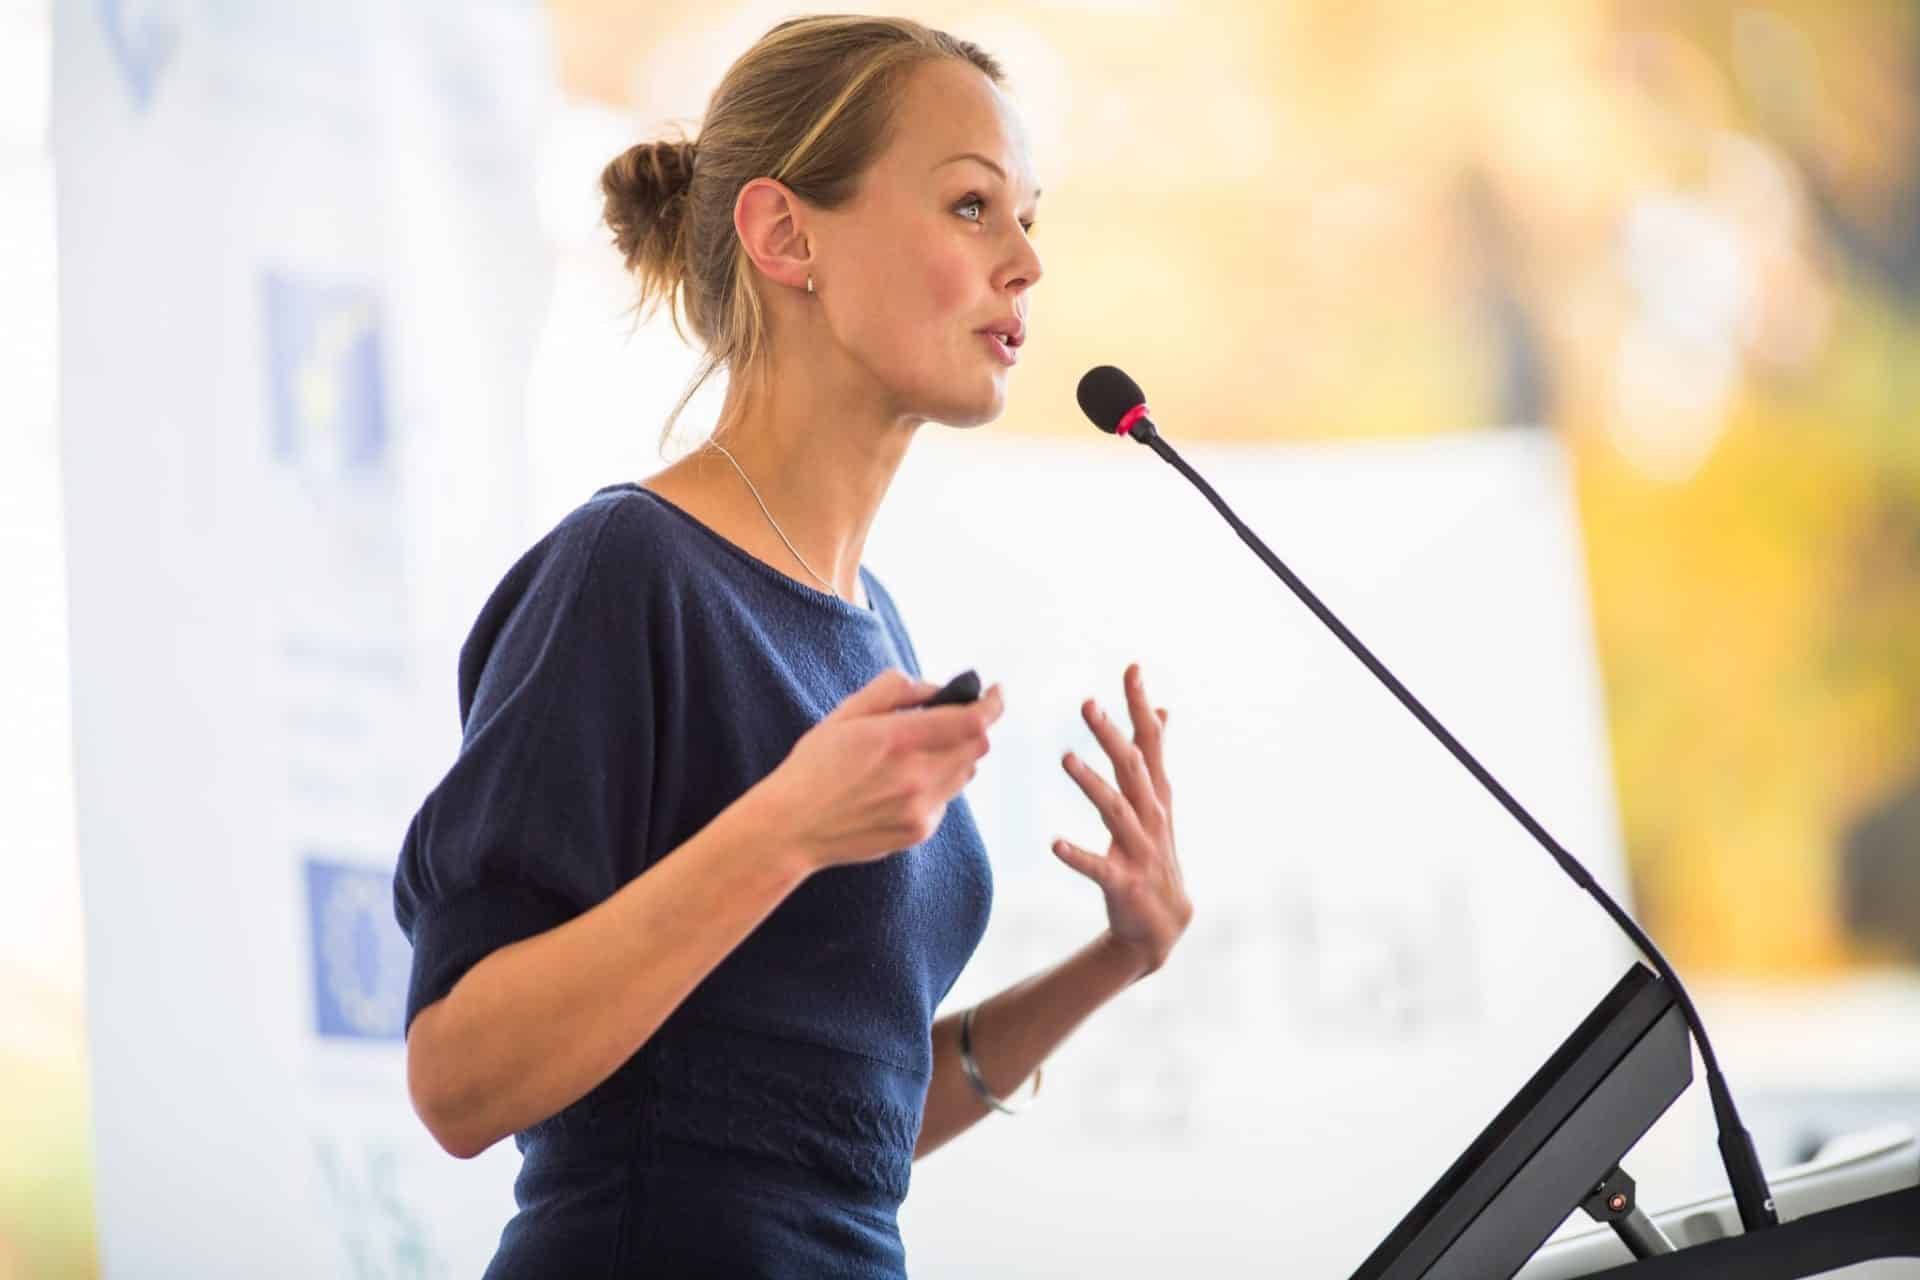 Modified Description: A woman engaging the audience with presentation techniques at a podium.